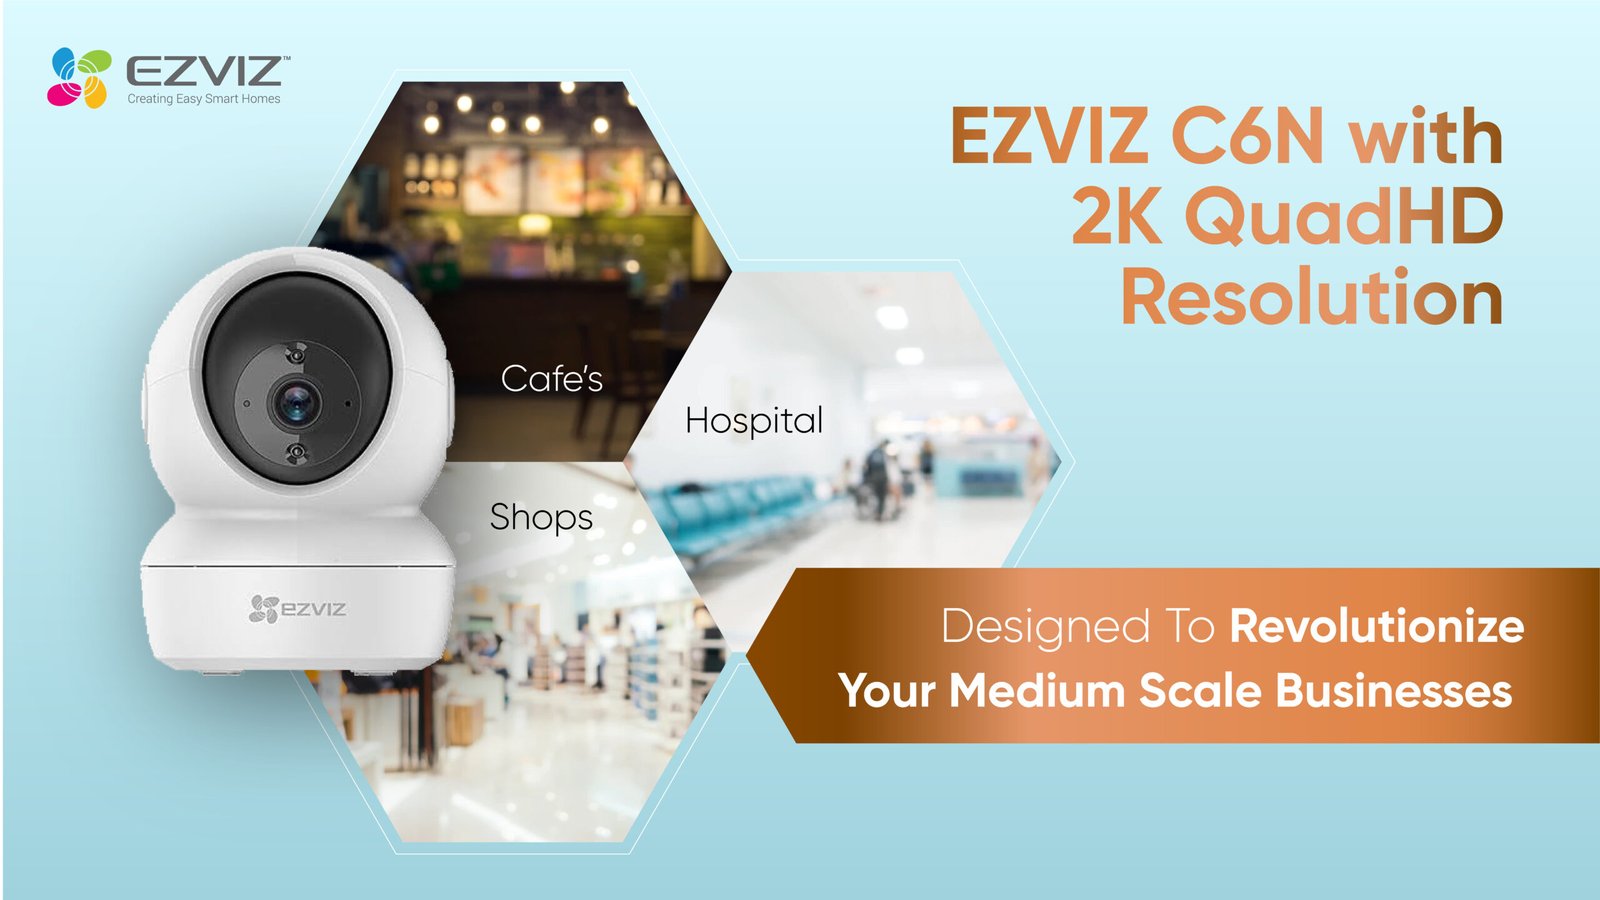 Press Release Image DESIGNED TO REVOLUTIONISE YOUR MEDIUM SCALE BUSINESS EZVIZ LAUNCHES C6N IN 2K QUAD HD RESOLUTION CAMERA scaled